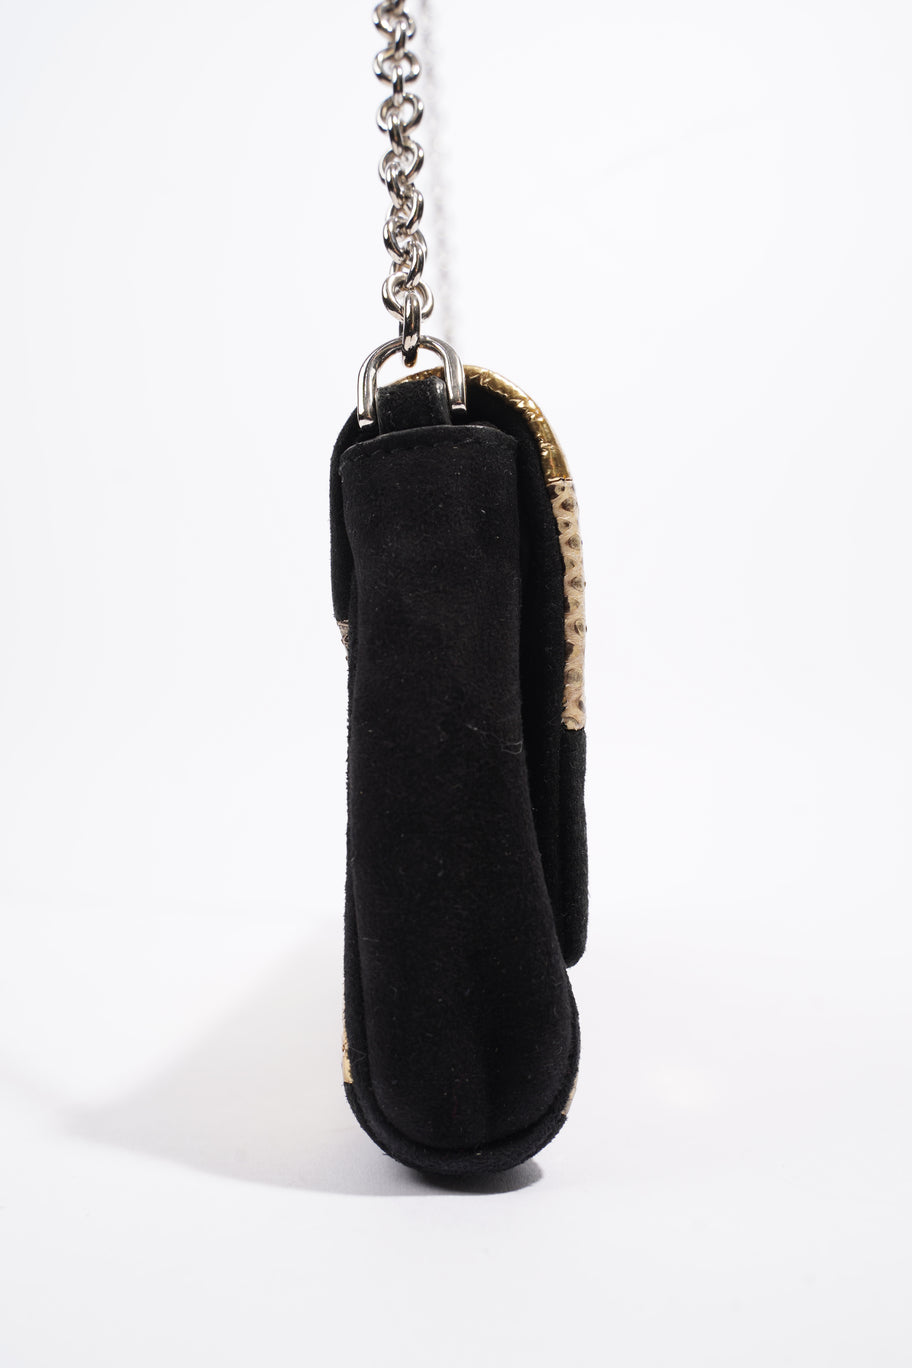 Clutch Bag With Chain Black / Gold Python Image 6